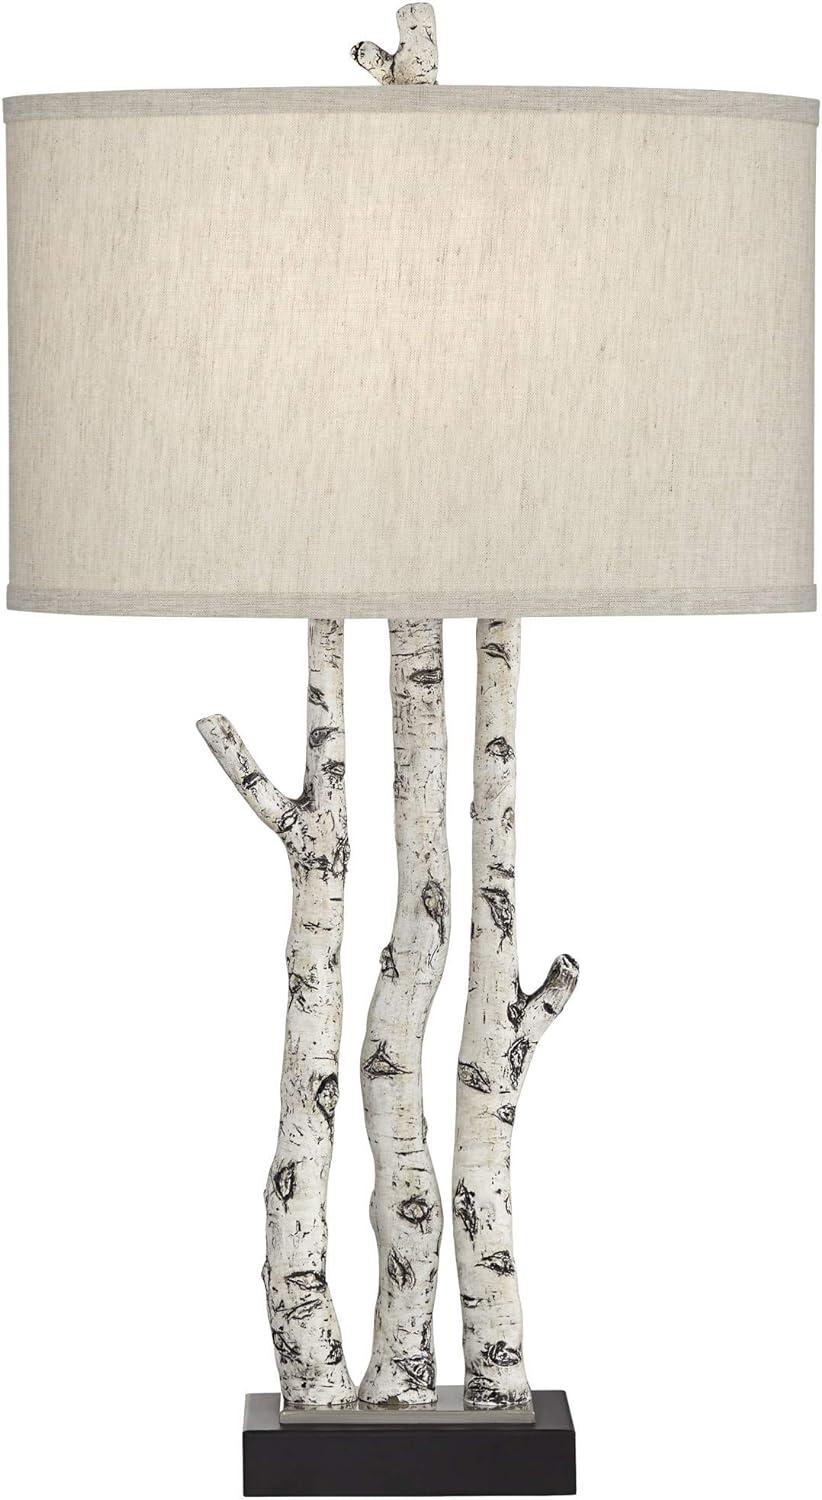 Rustic White Birch Branch Table Lamp with Gray Linen Shade